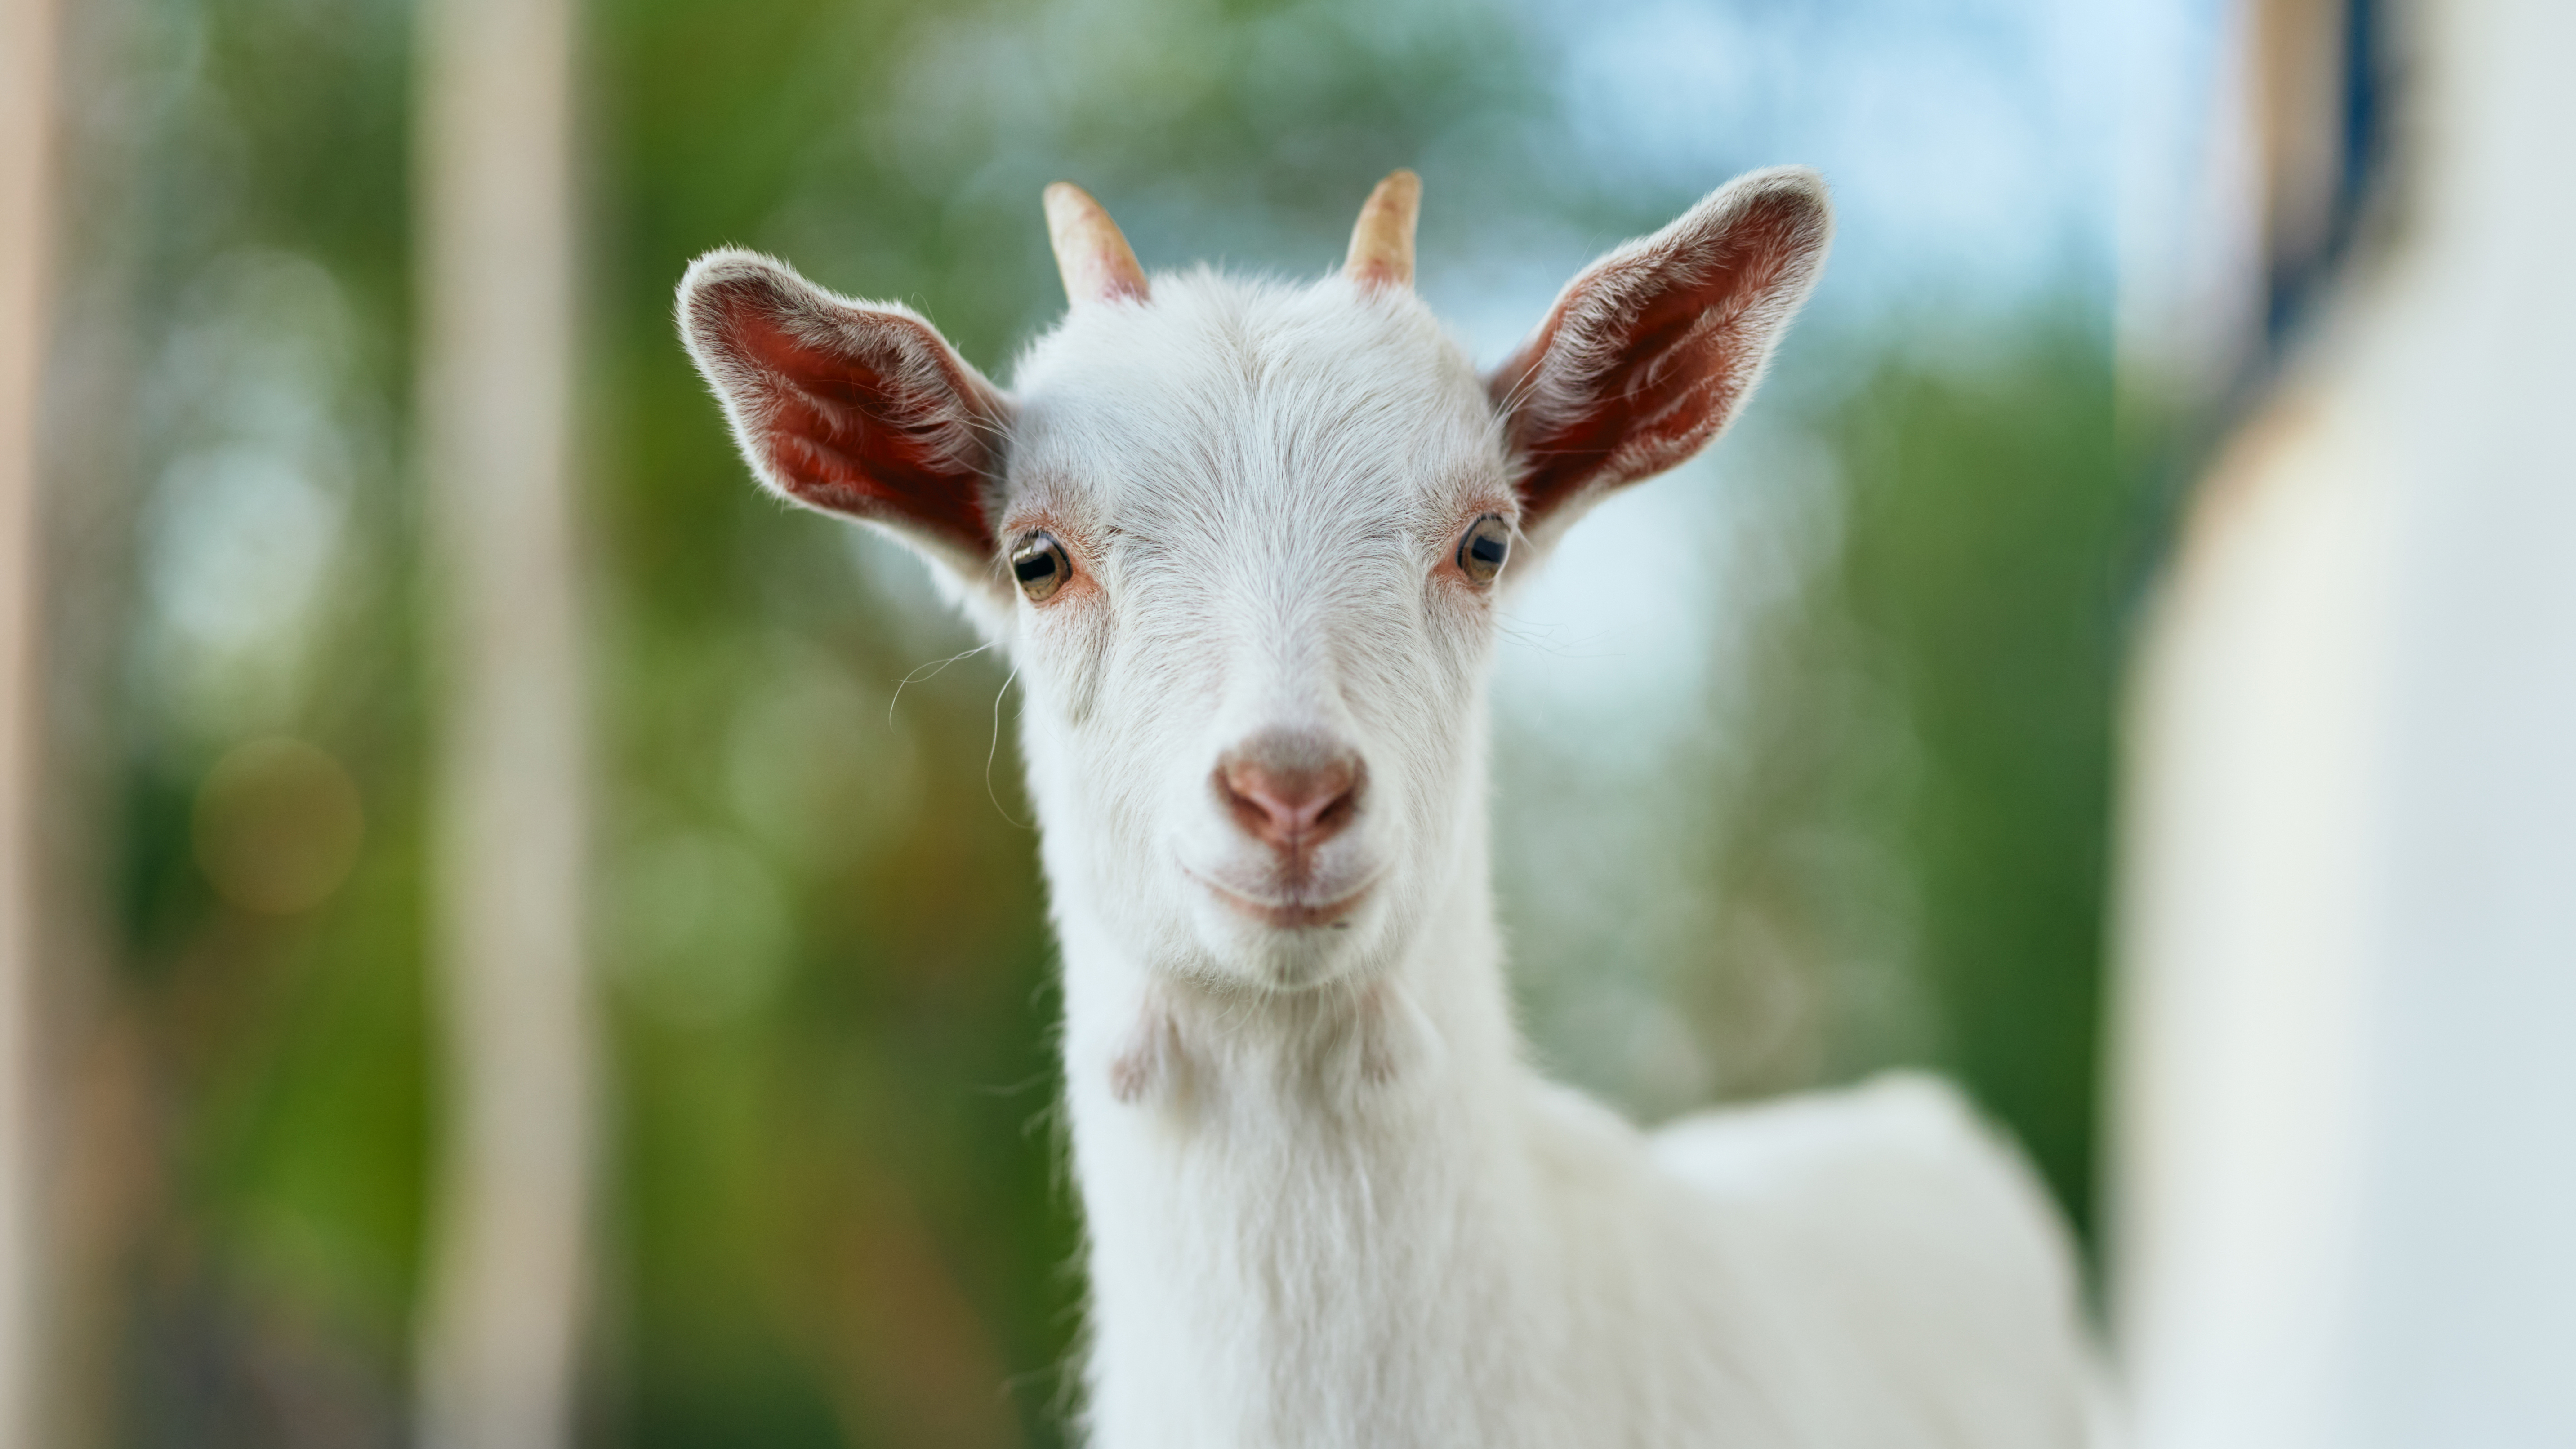 photo of a baby goat looking at camera